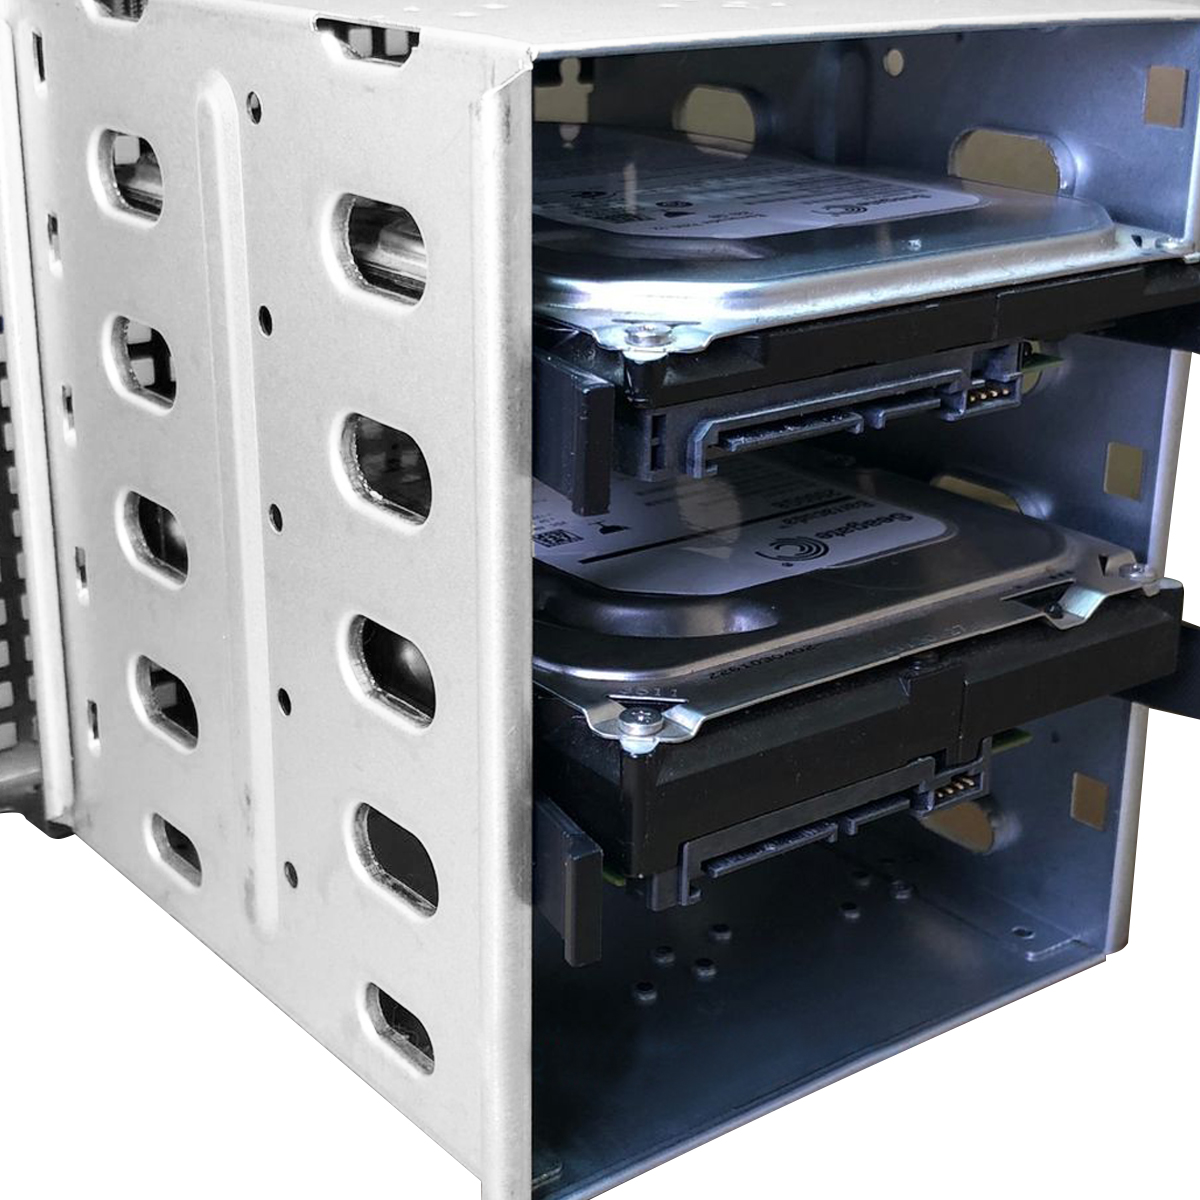 5.25" to 5x 3.5" SATA SAS HDD Cage Rack Hard Drive Tray Caddy Converter with Fan Space 12